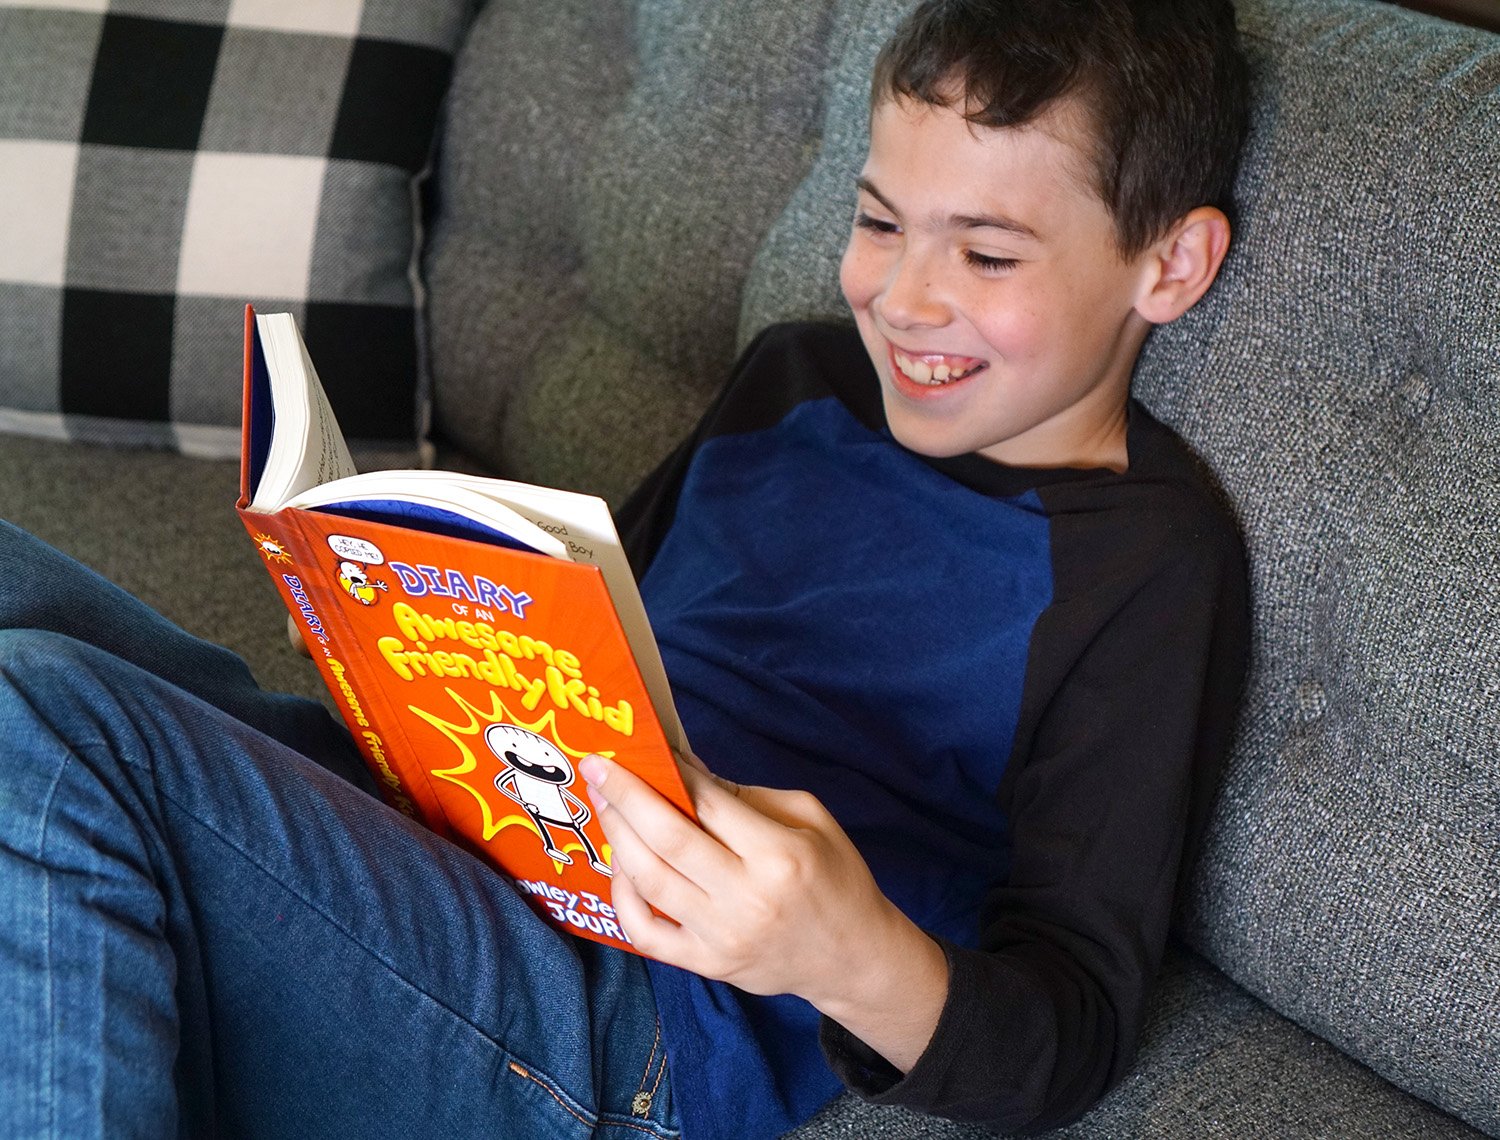 adorable child smiling reading book